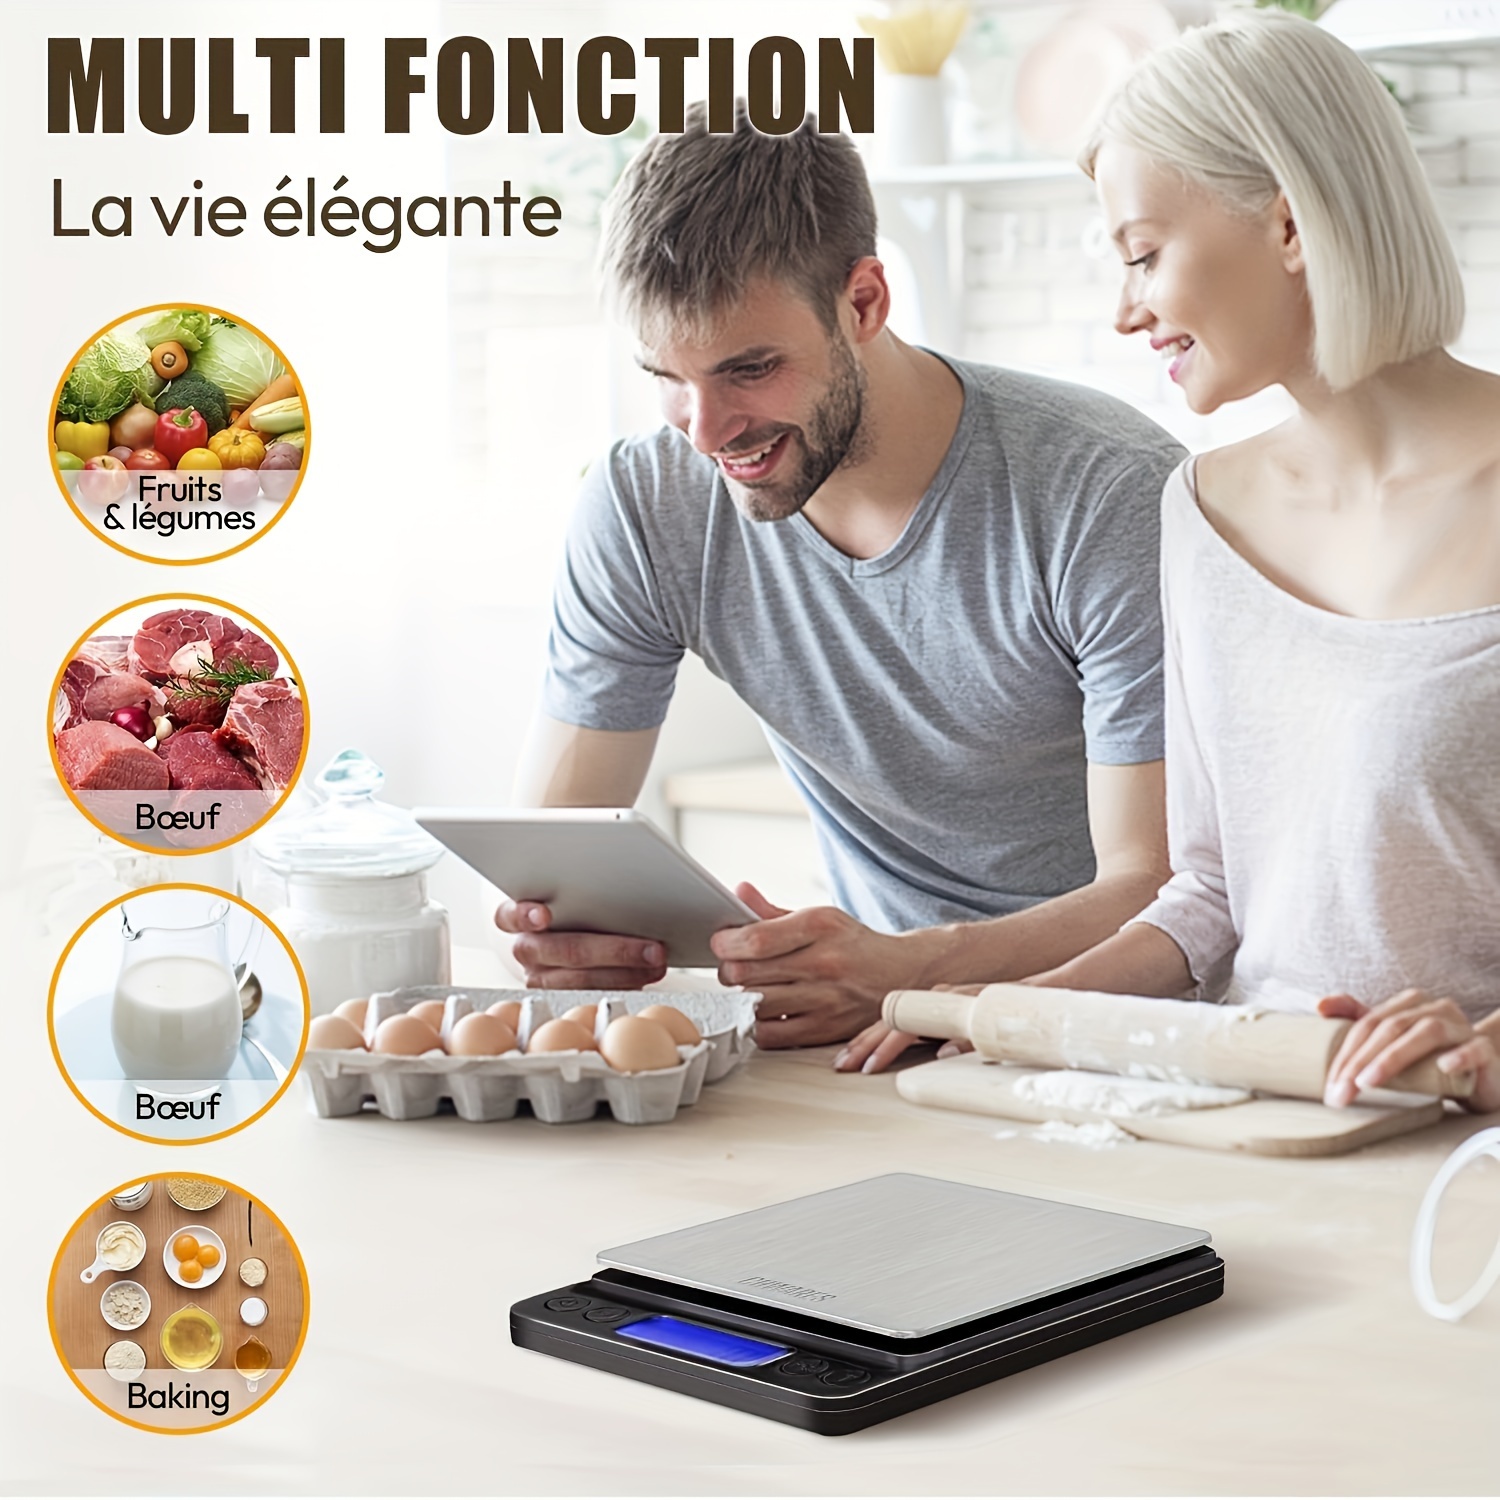  Food Scale Tempered Glass Waterproof Digital Kitchen Weight  Grams Ounces Oz Cooking Baking High Precision Target in Grams Ounces Range  from 1g-5000g Tare Function: Home & Kitchen